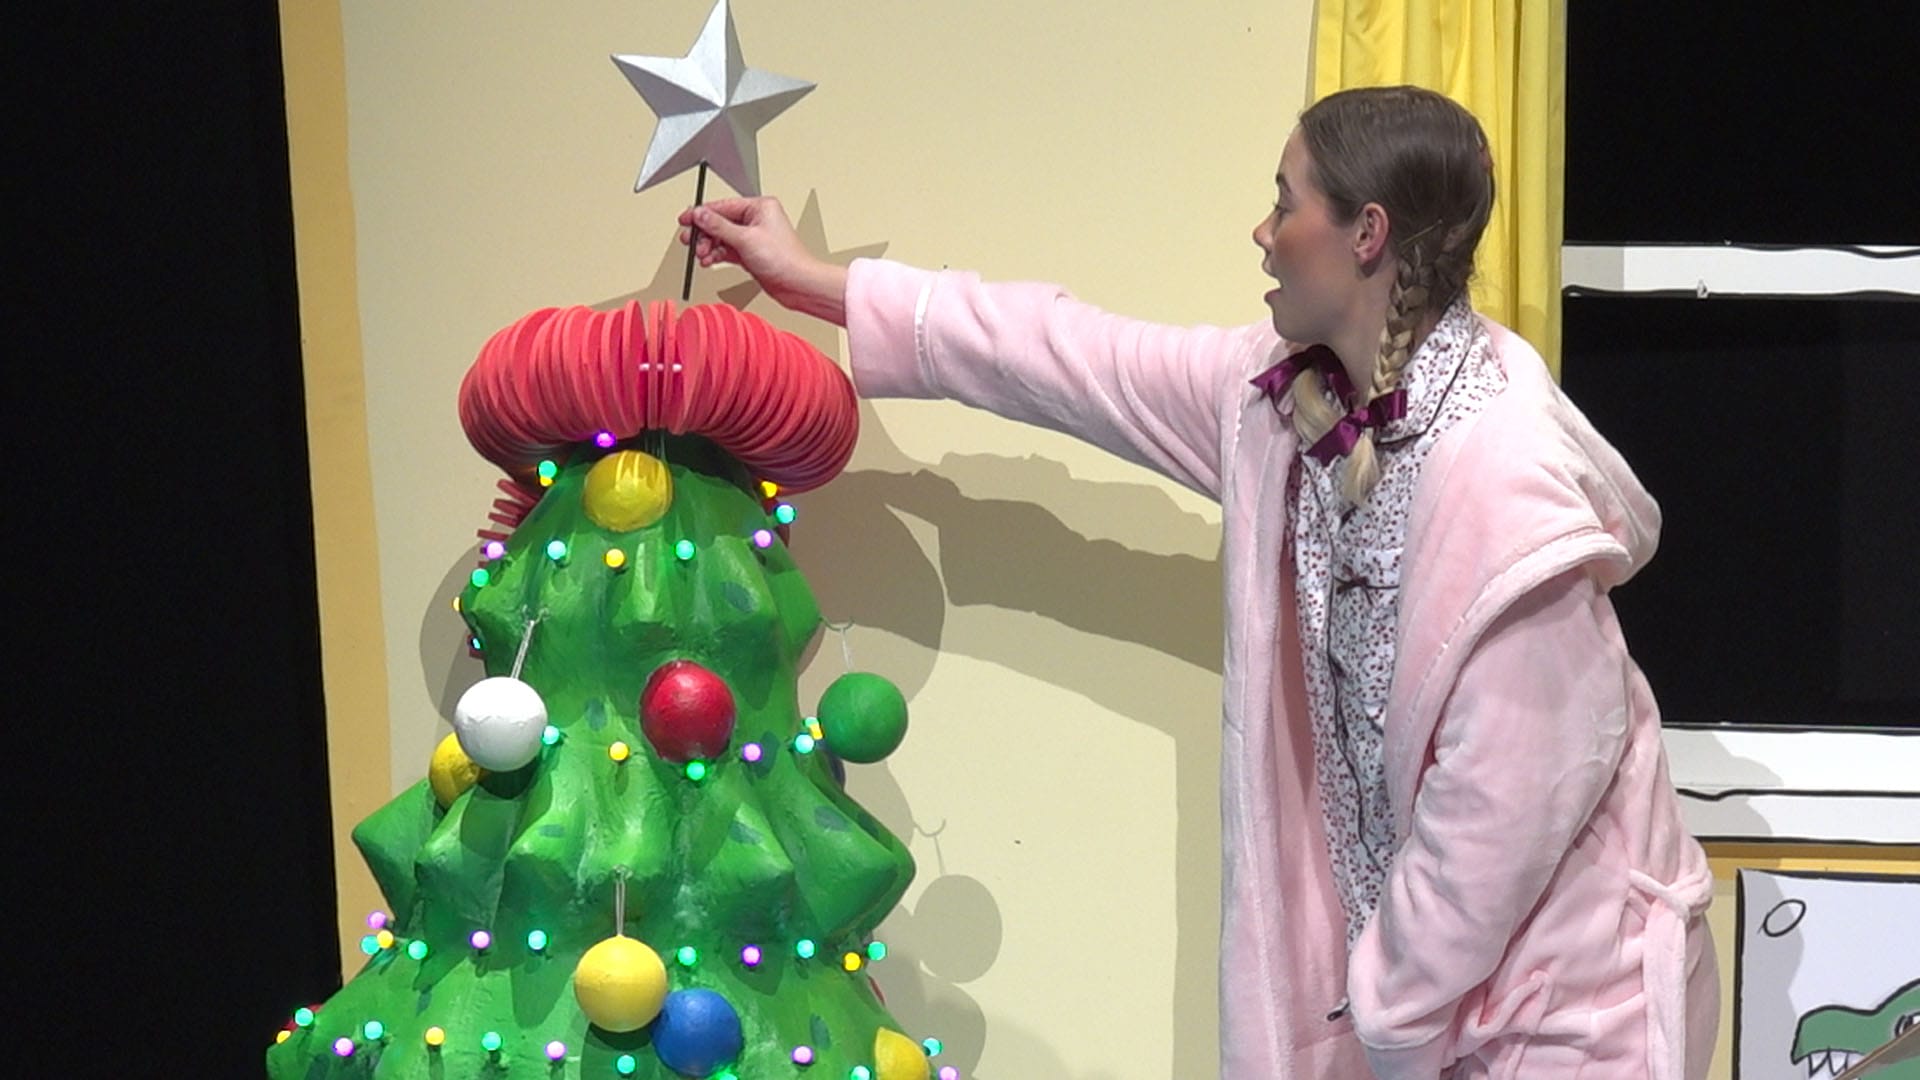 A girl puts the star on top of the Christmas three